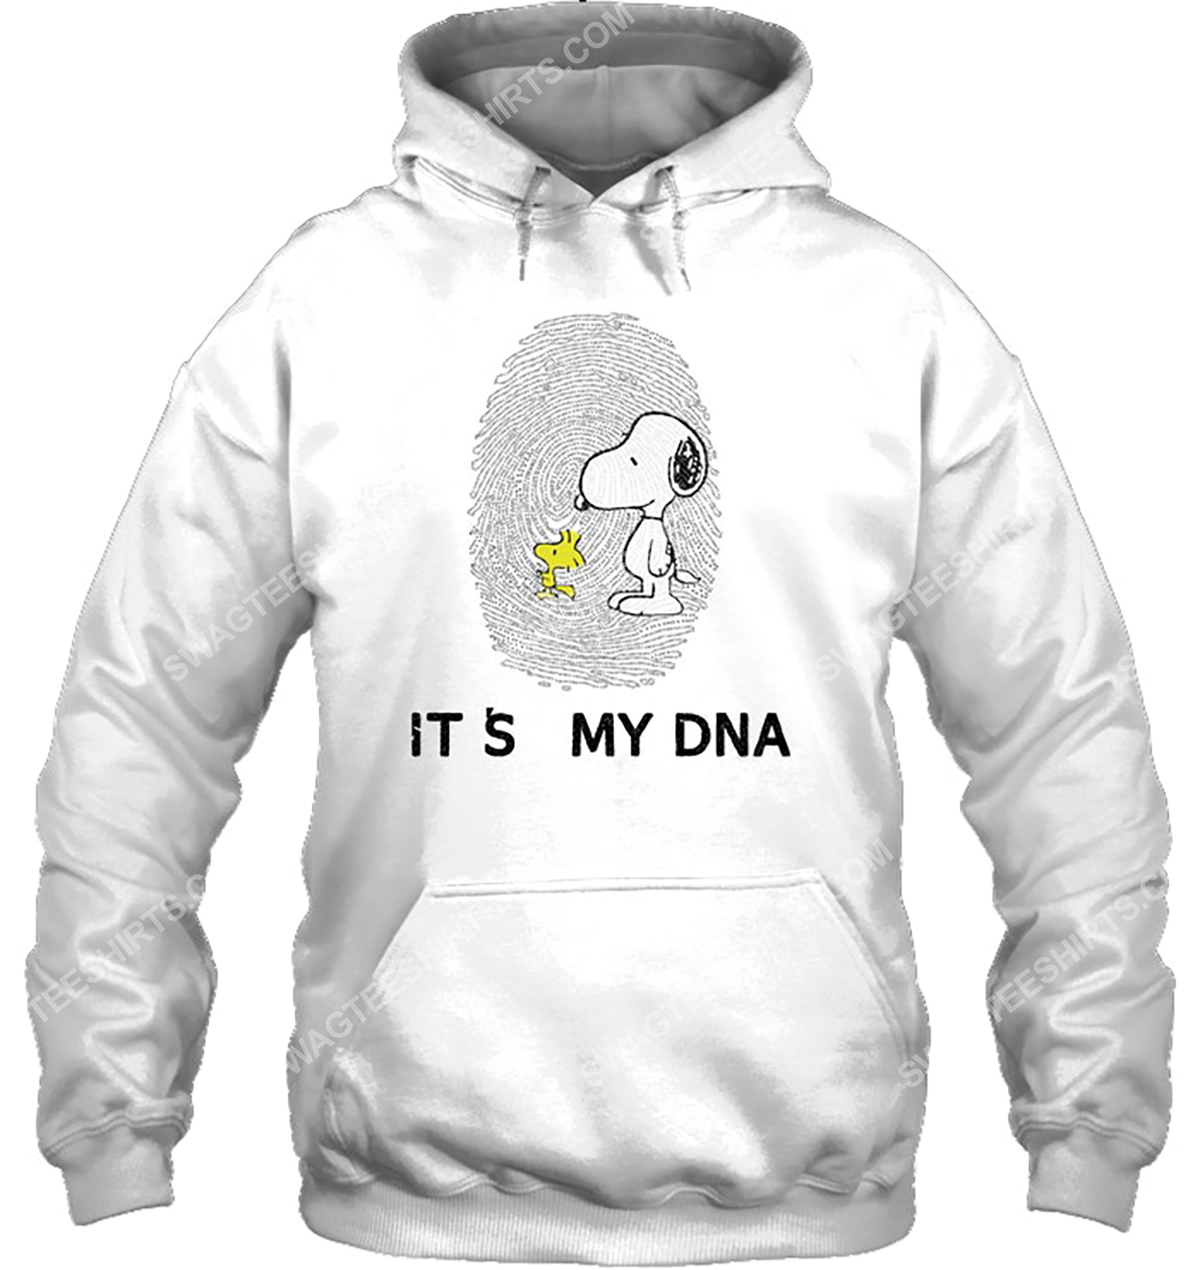 The peanuts snoopy and woodstock it's my dna hoodie 1